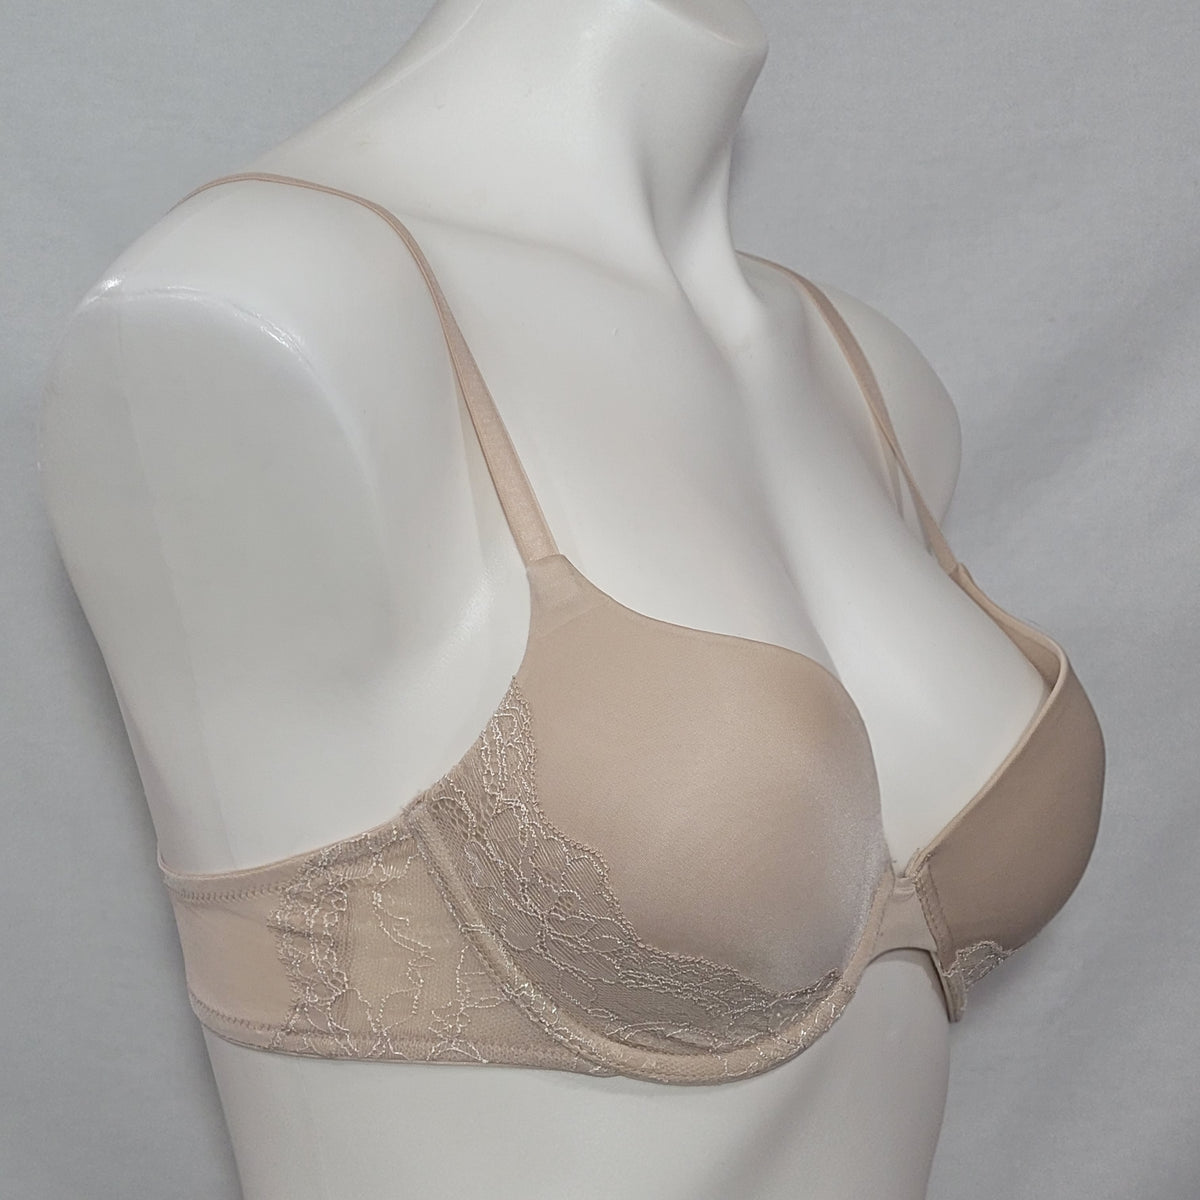 Calvin Klein Aerie Padded Push Up Bra Lot Size 32A #C3522